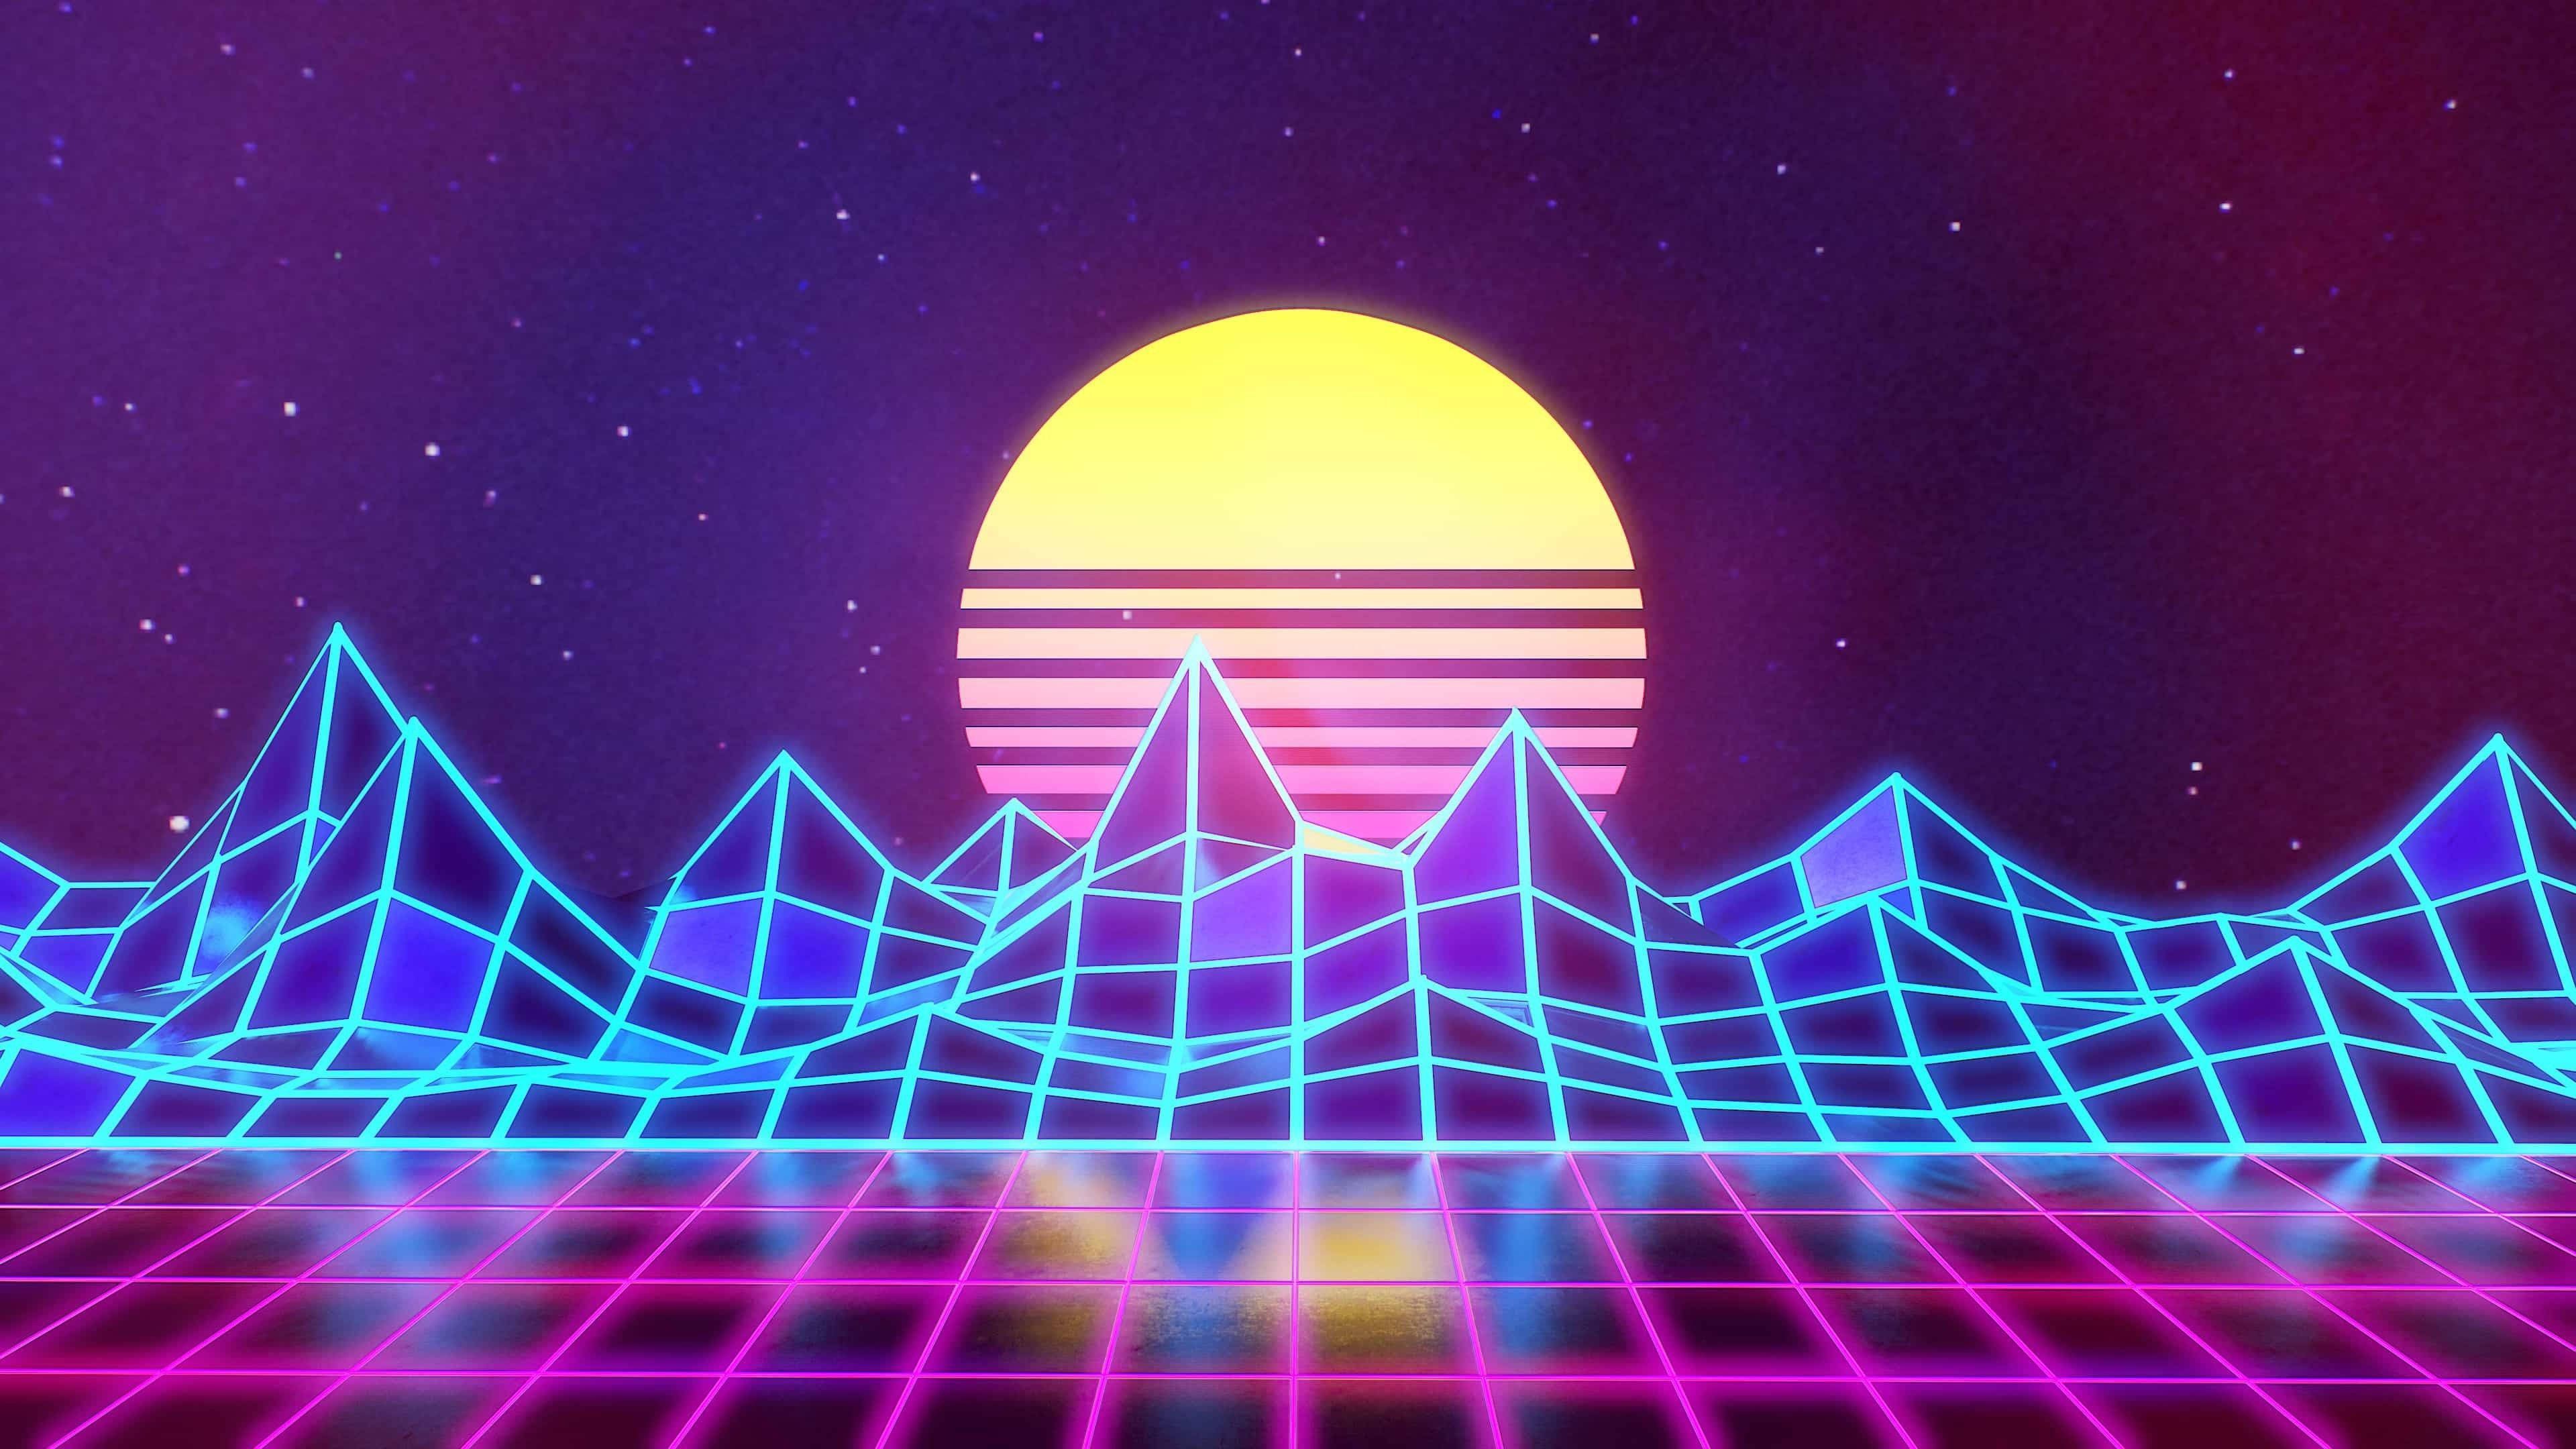 A neon sunset over mountains - Synthwave